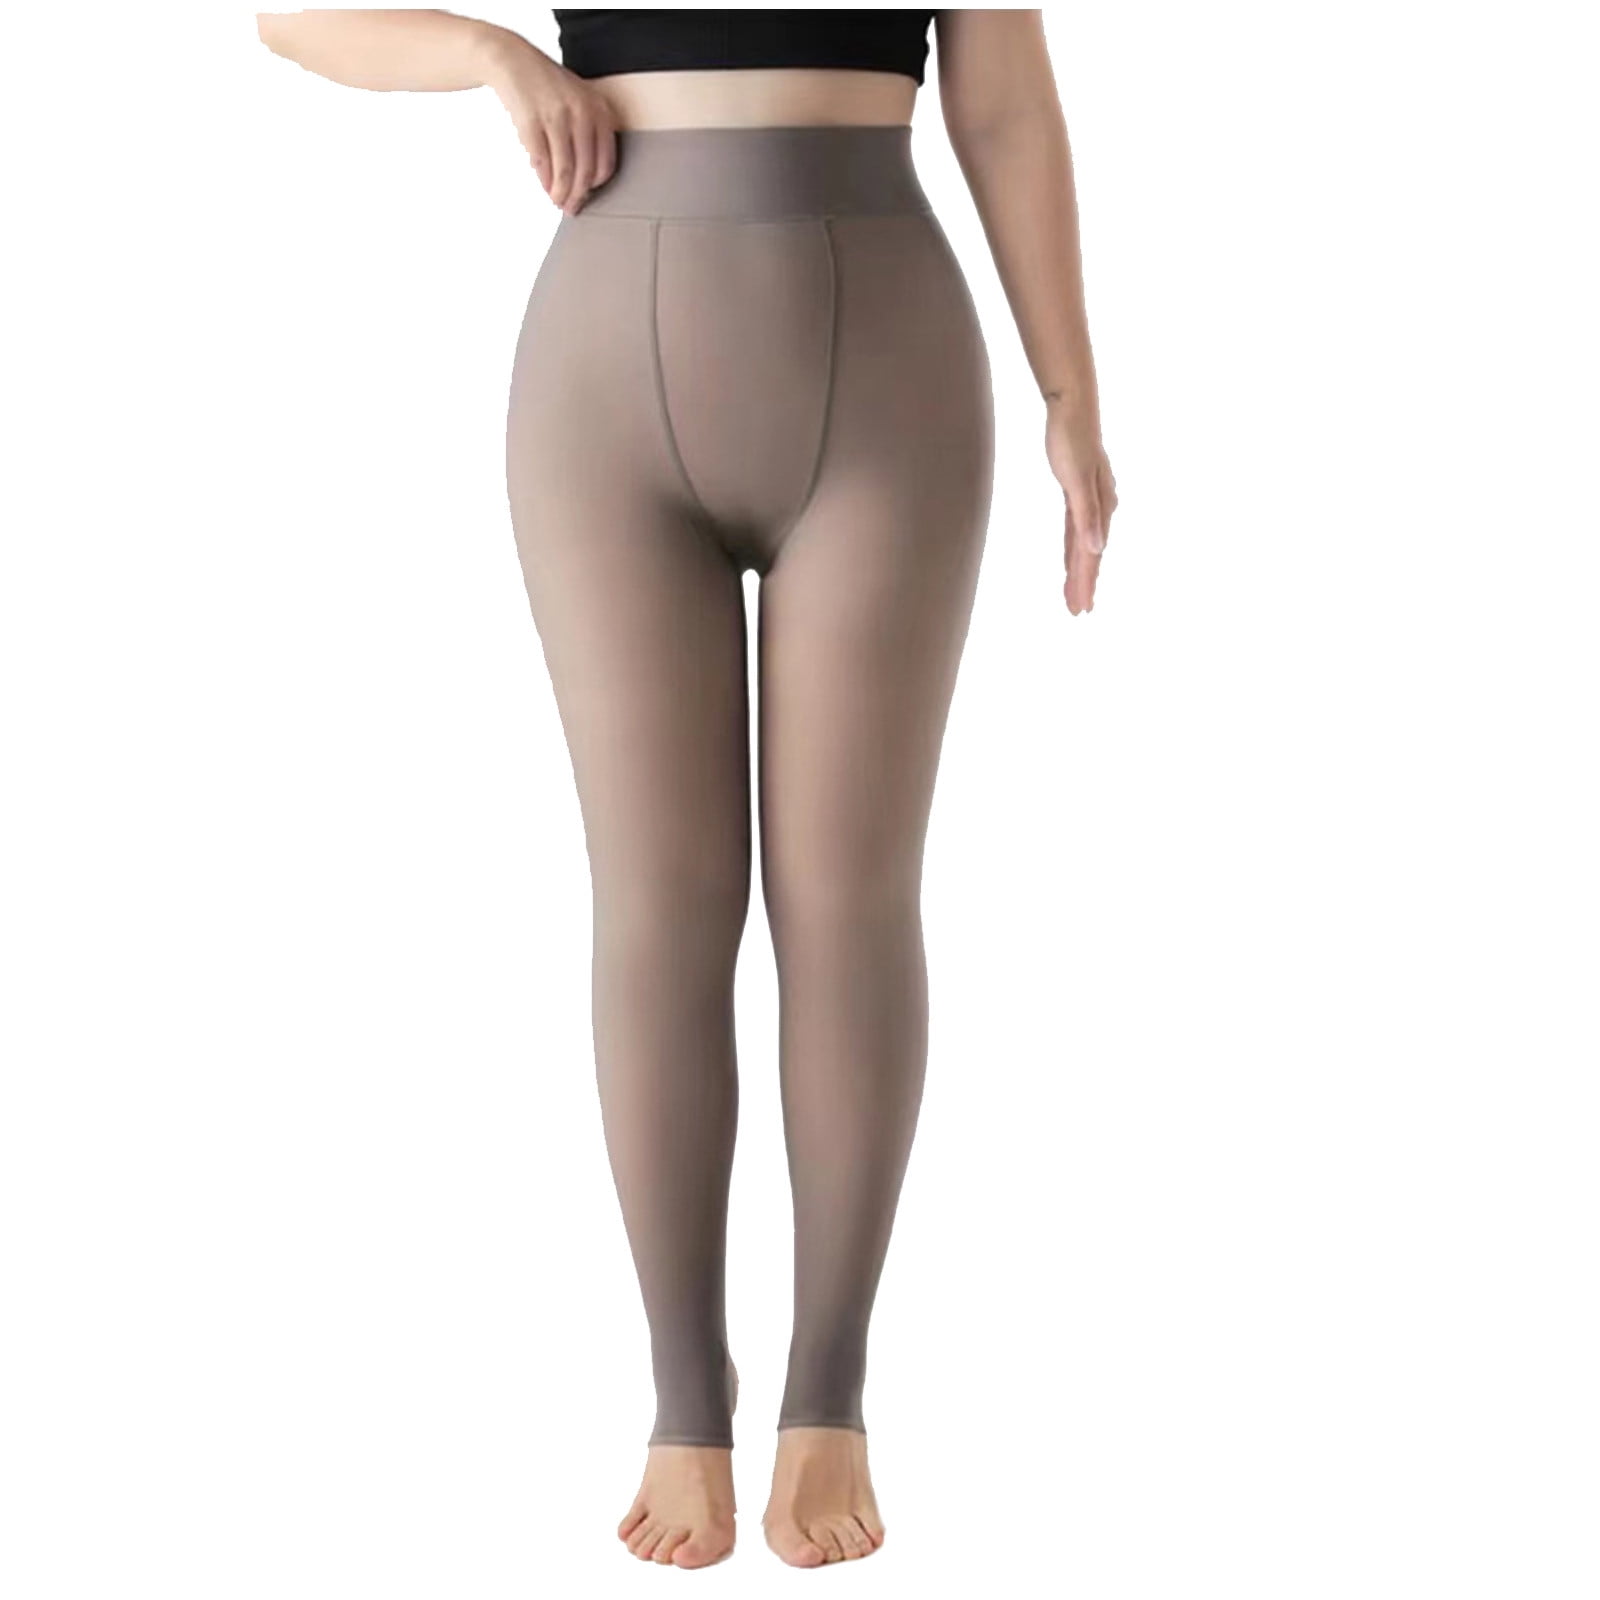 Clearance Fleece Lined Tights Women Plus Size Leggings Thermal Pantyhose  Fake Translucent Tights High Waisted Winter Warm Tight 